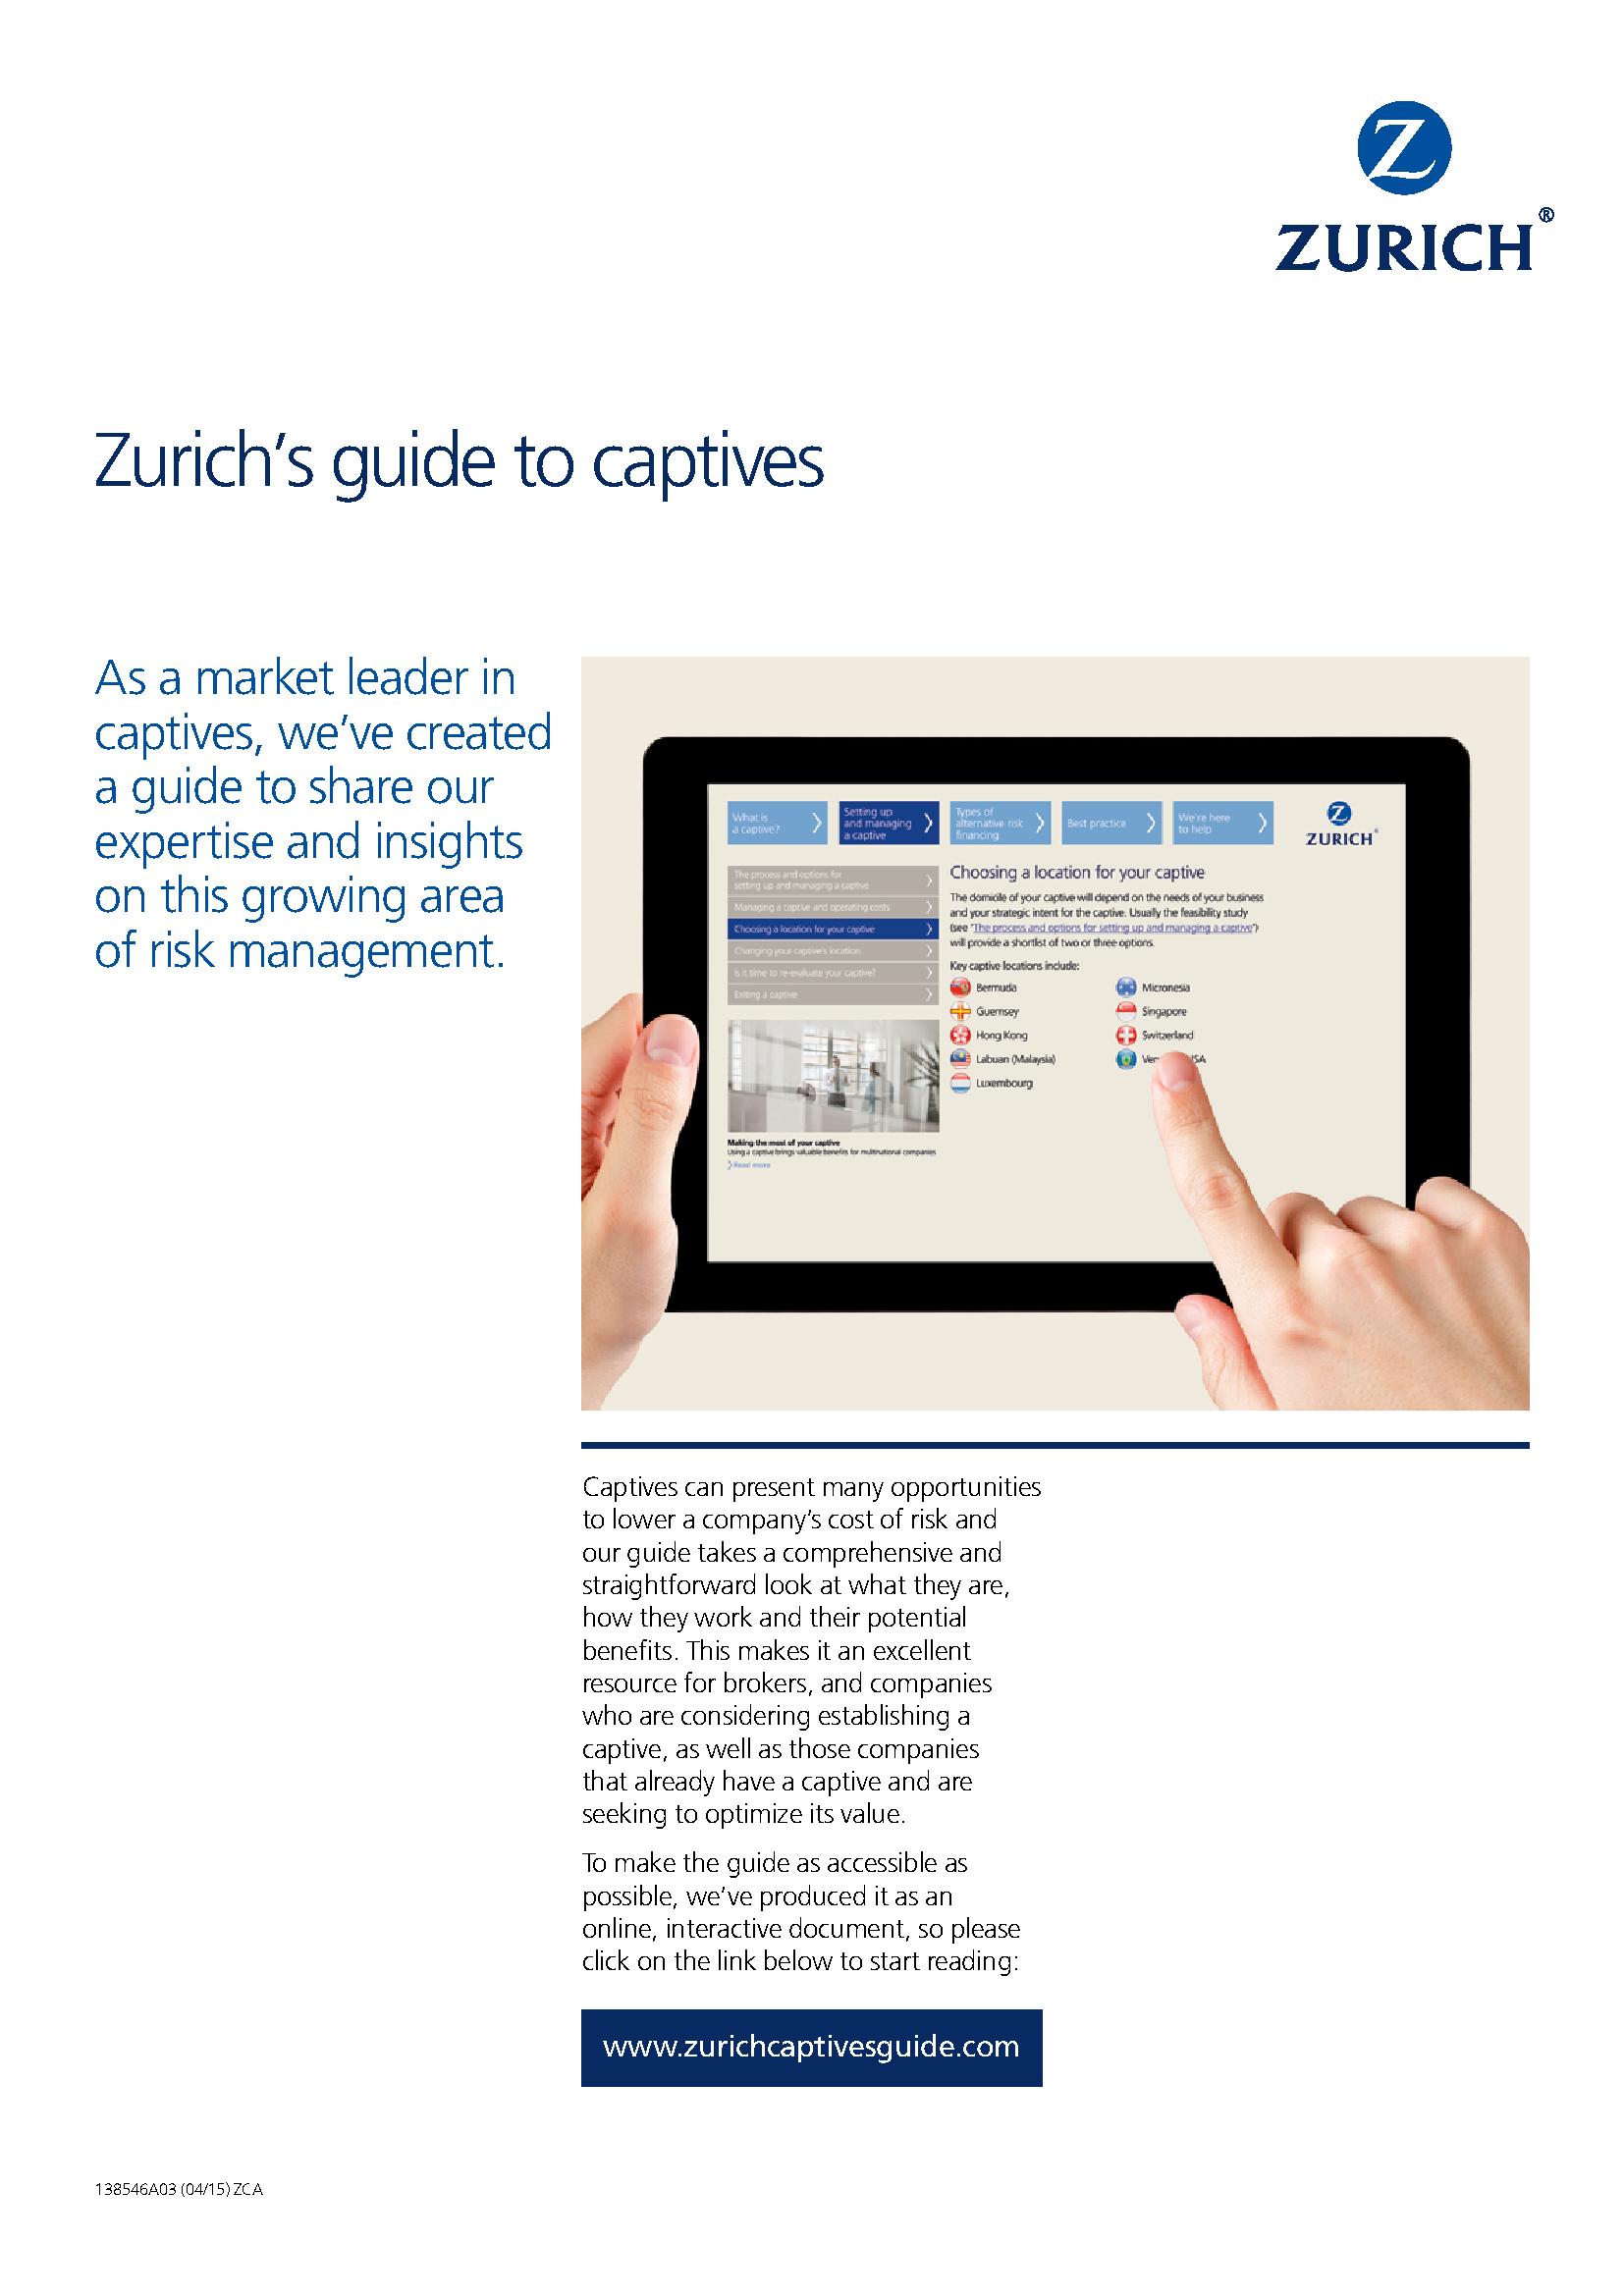 Zurich’s guide to captives